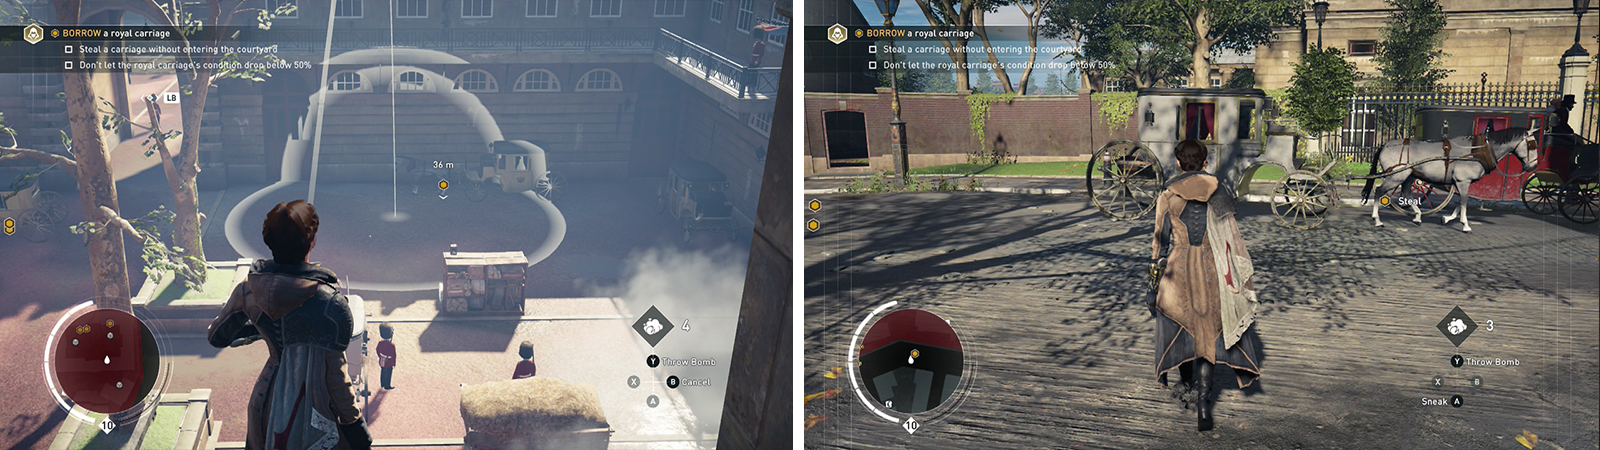 Use a smoke bomb to spook the horses (left) and hijack one of the carriages when it reaches the road (right).